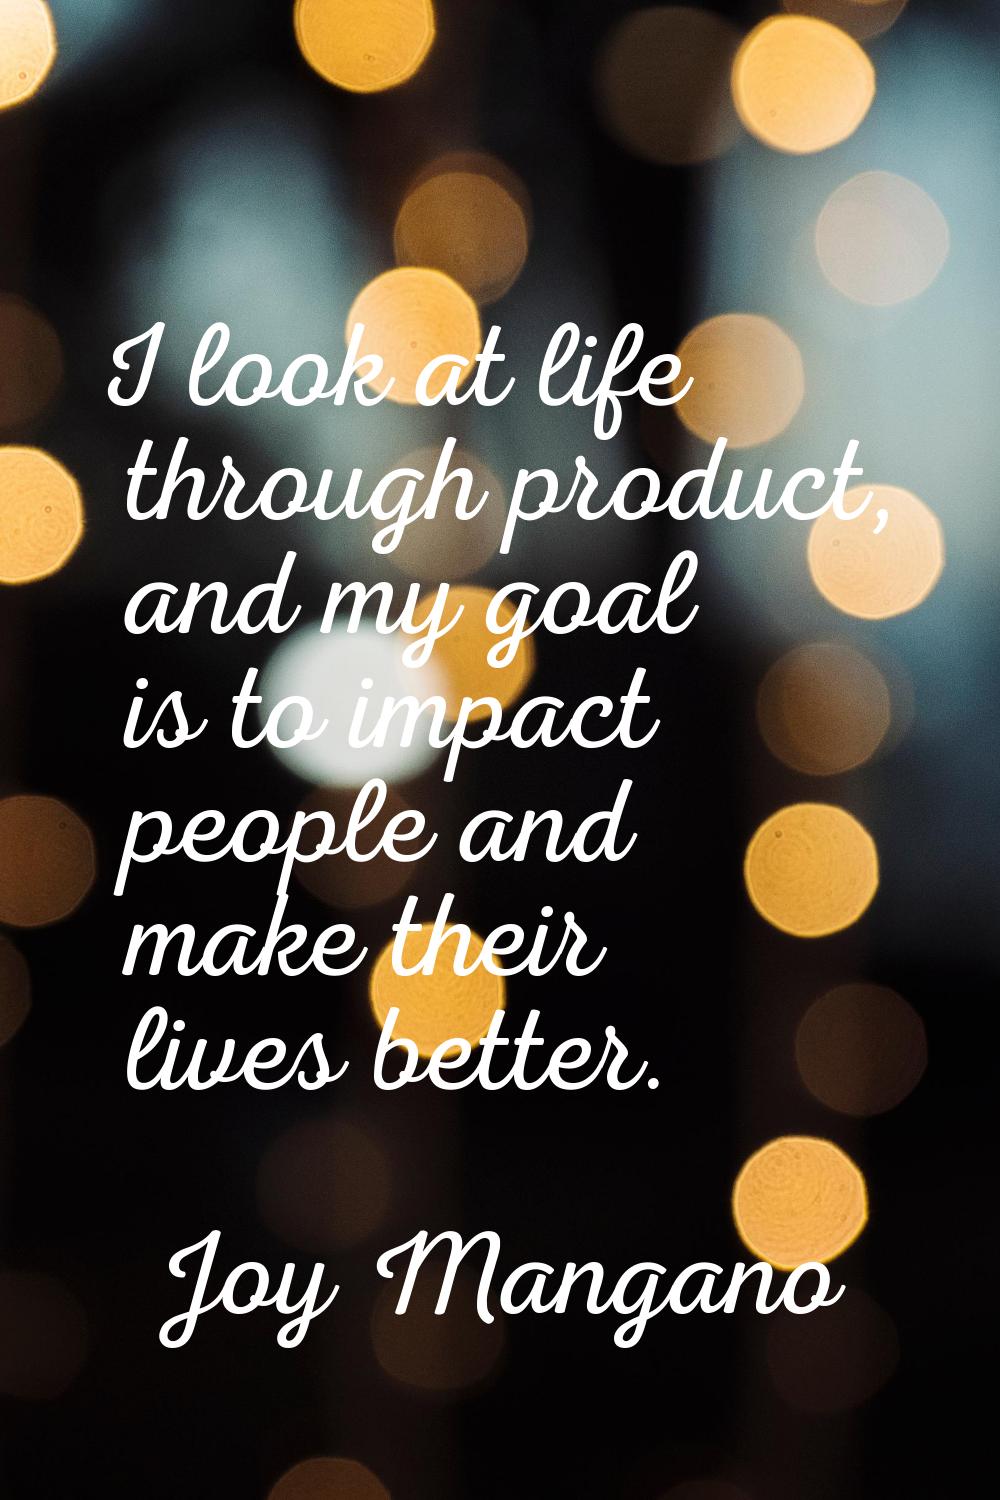 I look at life through product, and my goal is to impact people and make their lives better.